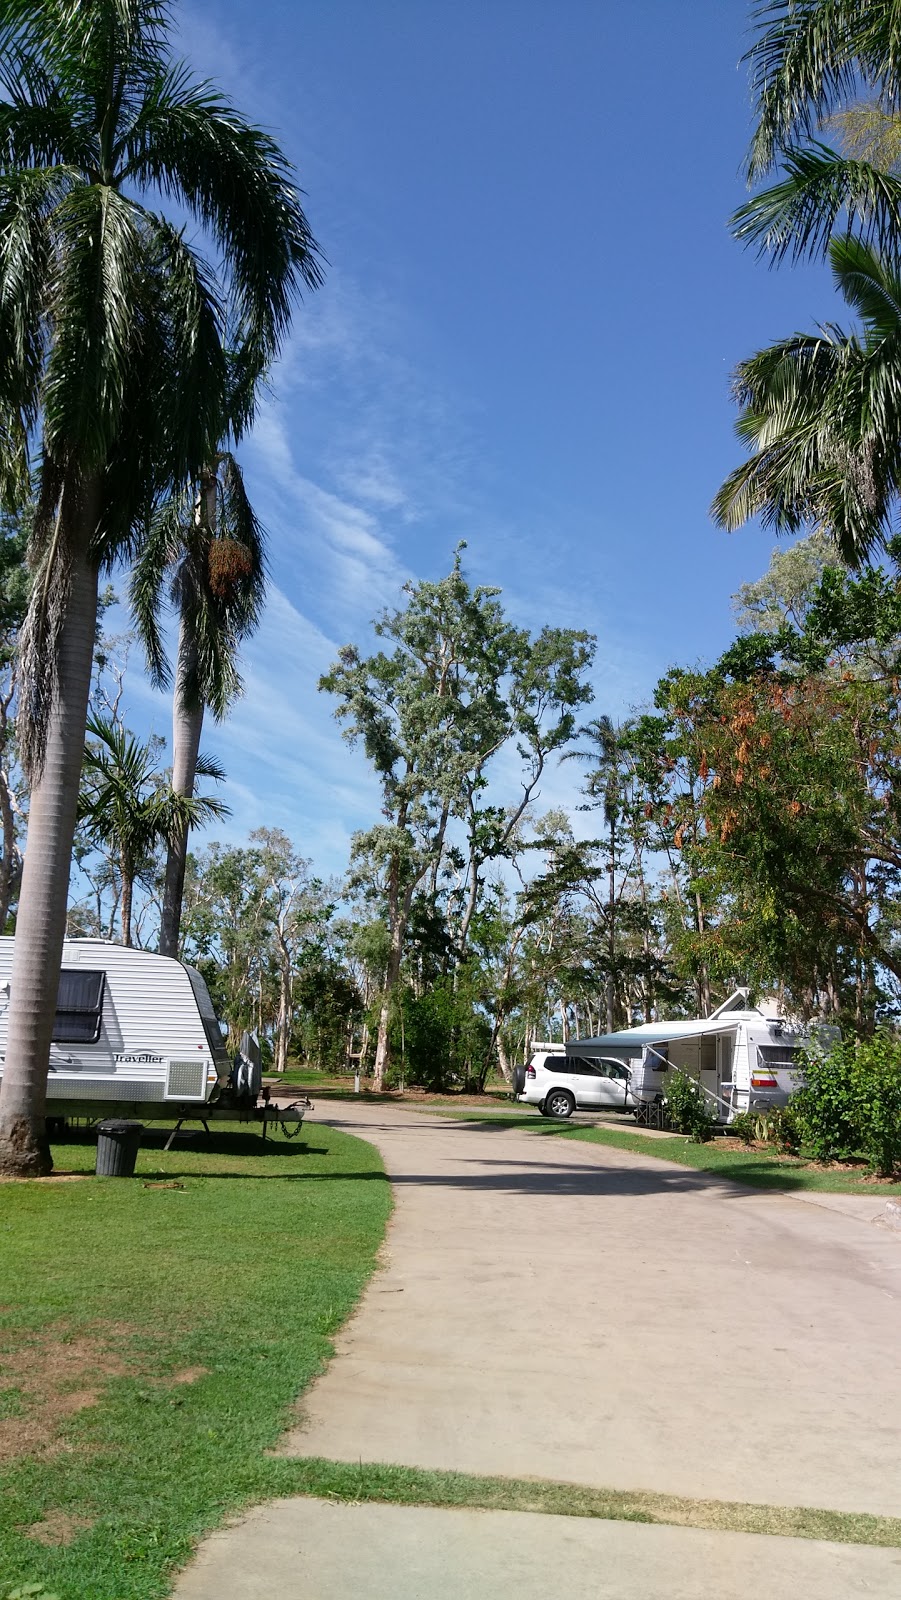 travellers rest caravan and camping park